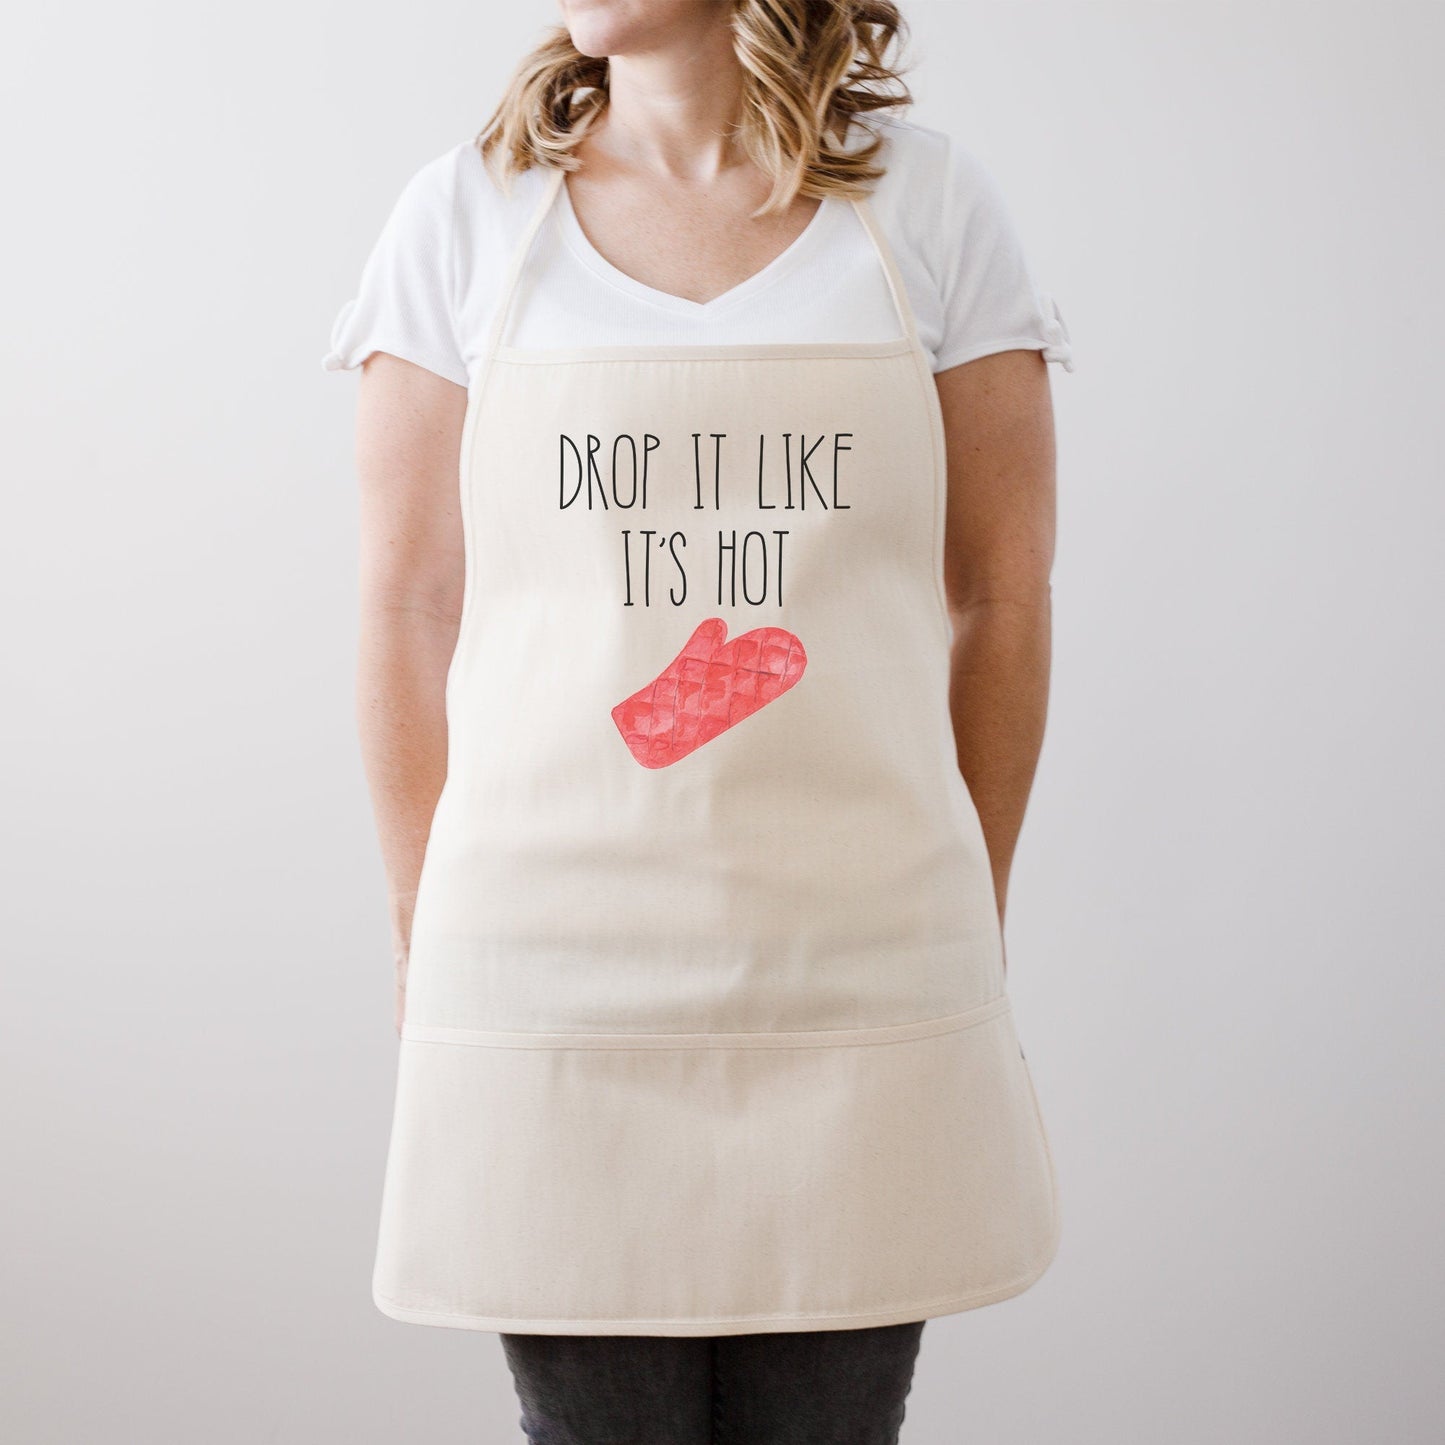 Load image into Gallery viewer, Joke Kitchen Apron Gift | Humor Apron Gifts | Funny Personalized Apron | Humor Kitchen Apron | Funny Kitchen Aprons | Custom Apron | Humor
